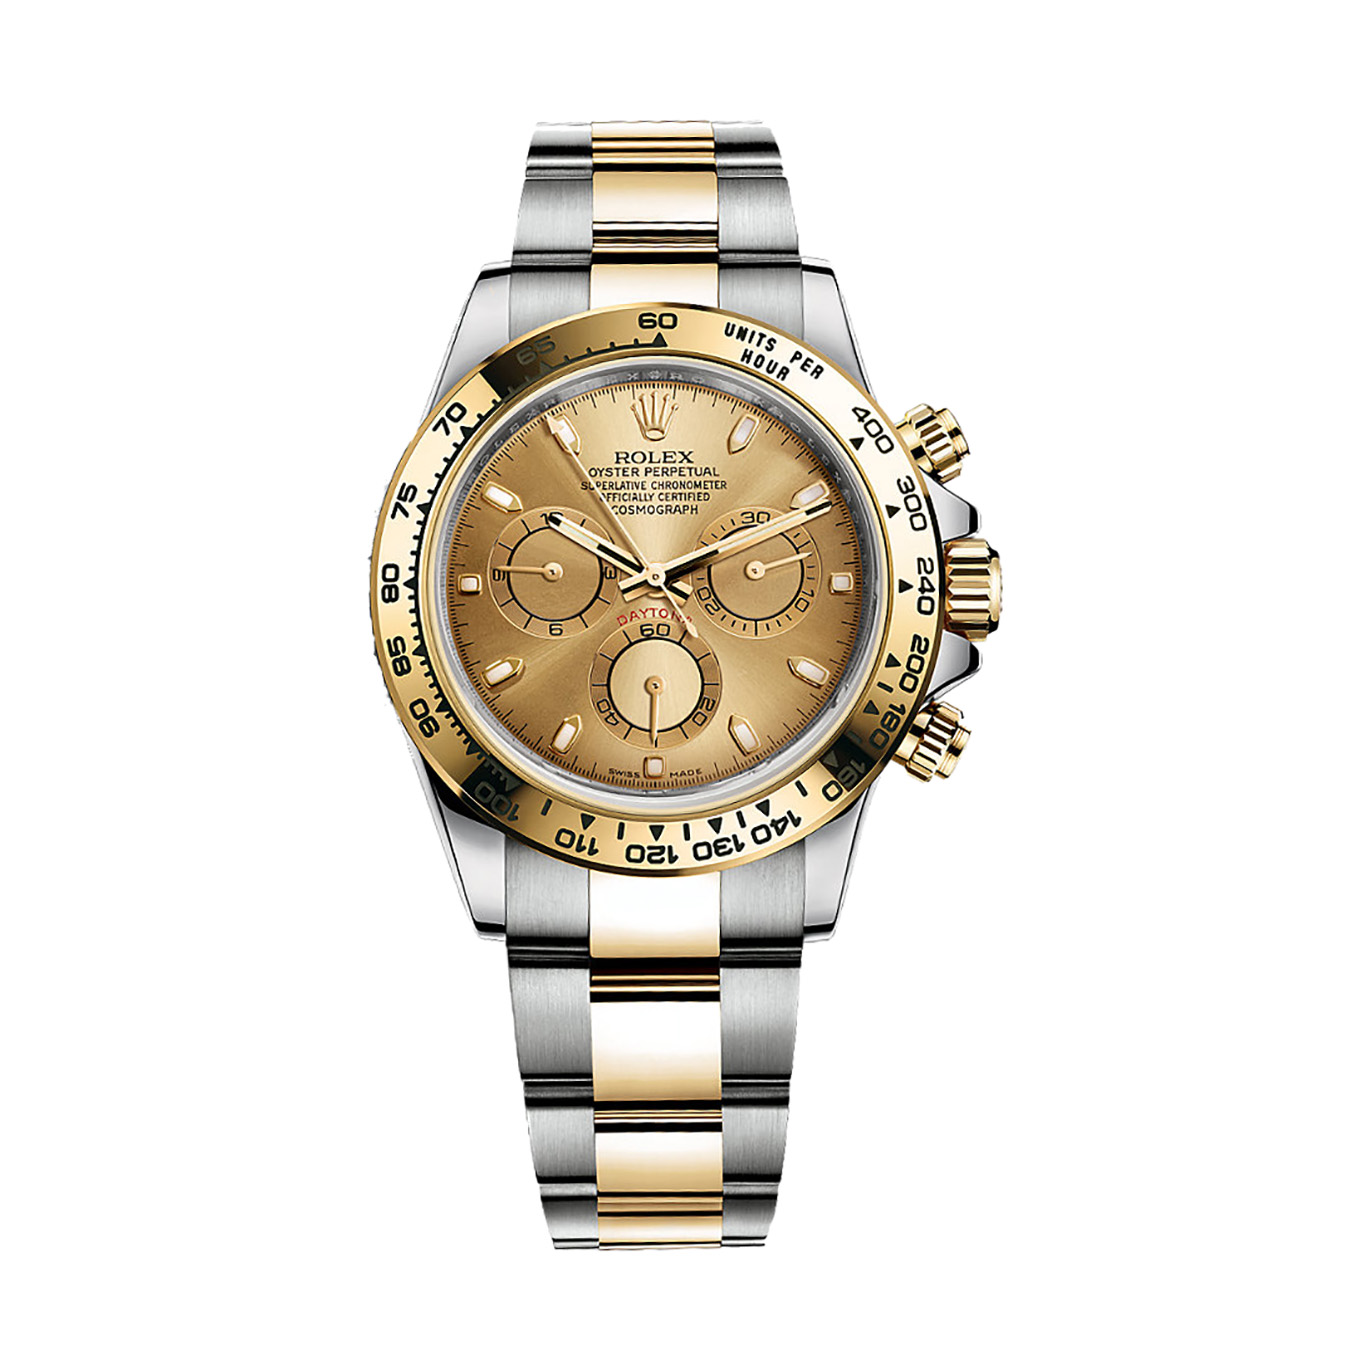 Cosmograph Daytona 116503 Gold & Stainless Steel Watch (Champagne)